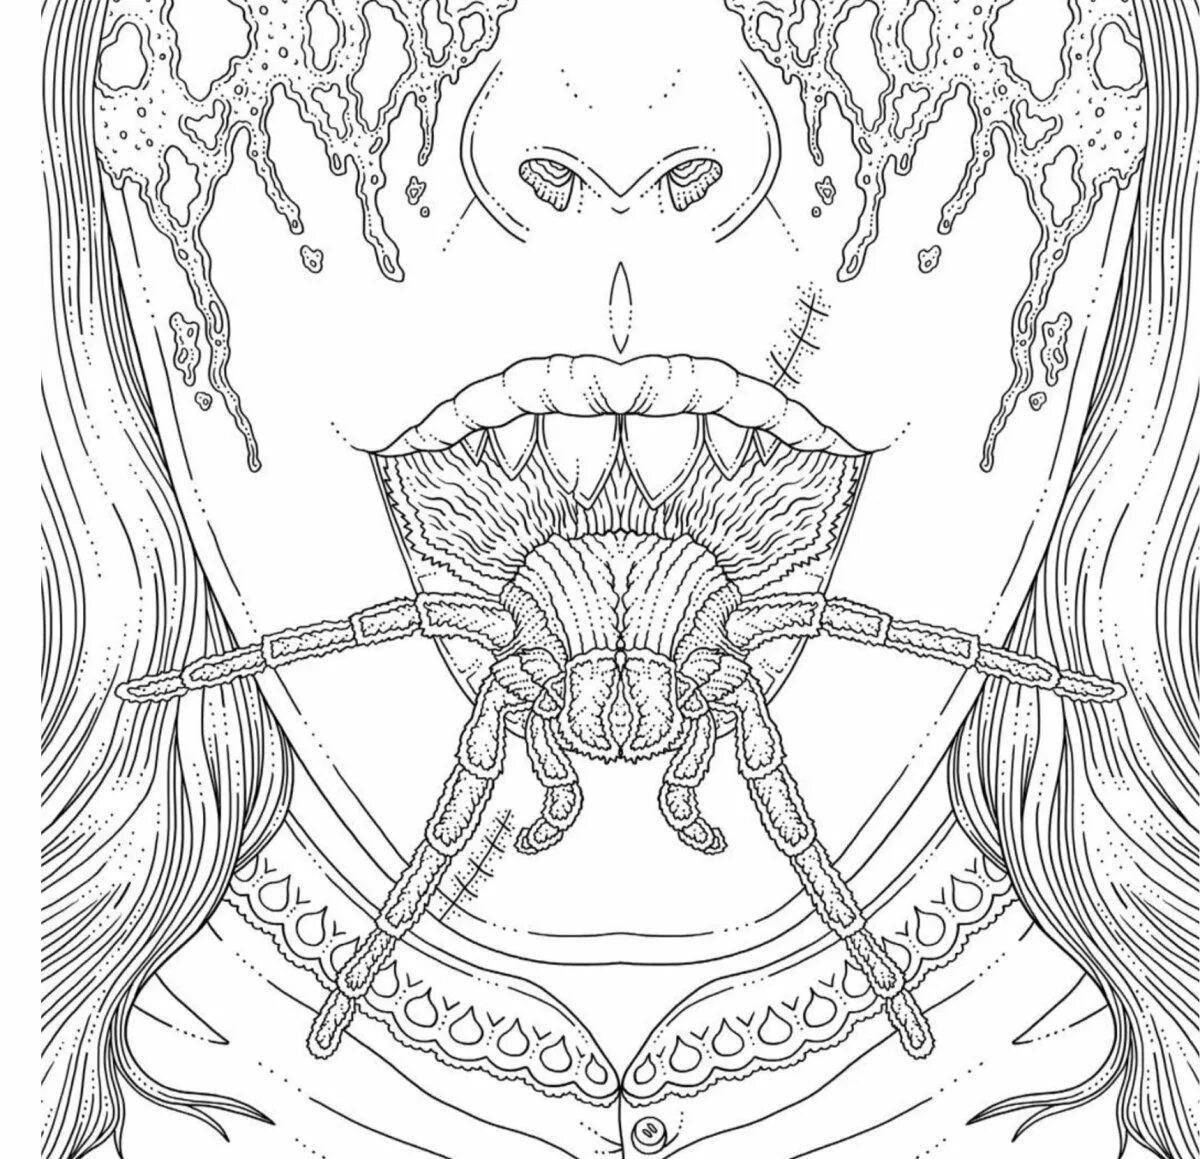 Ethereal and terrifying horror coloring book